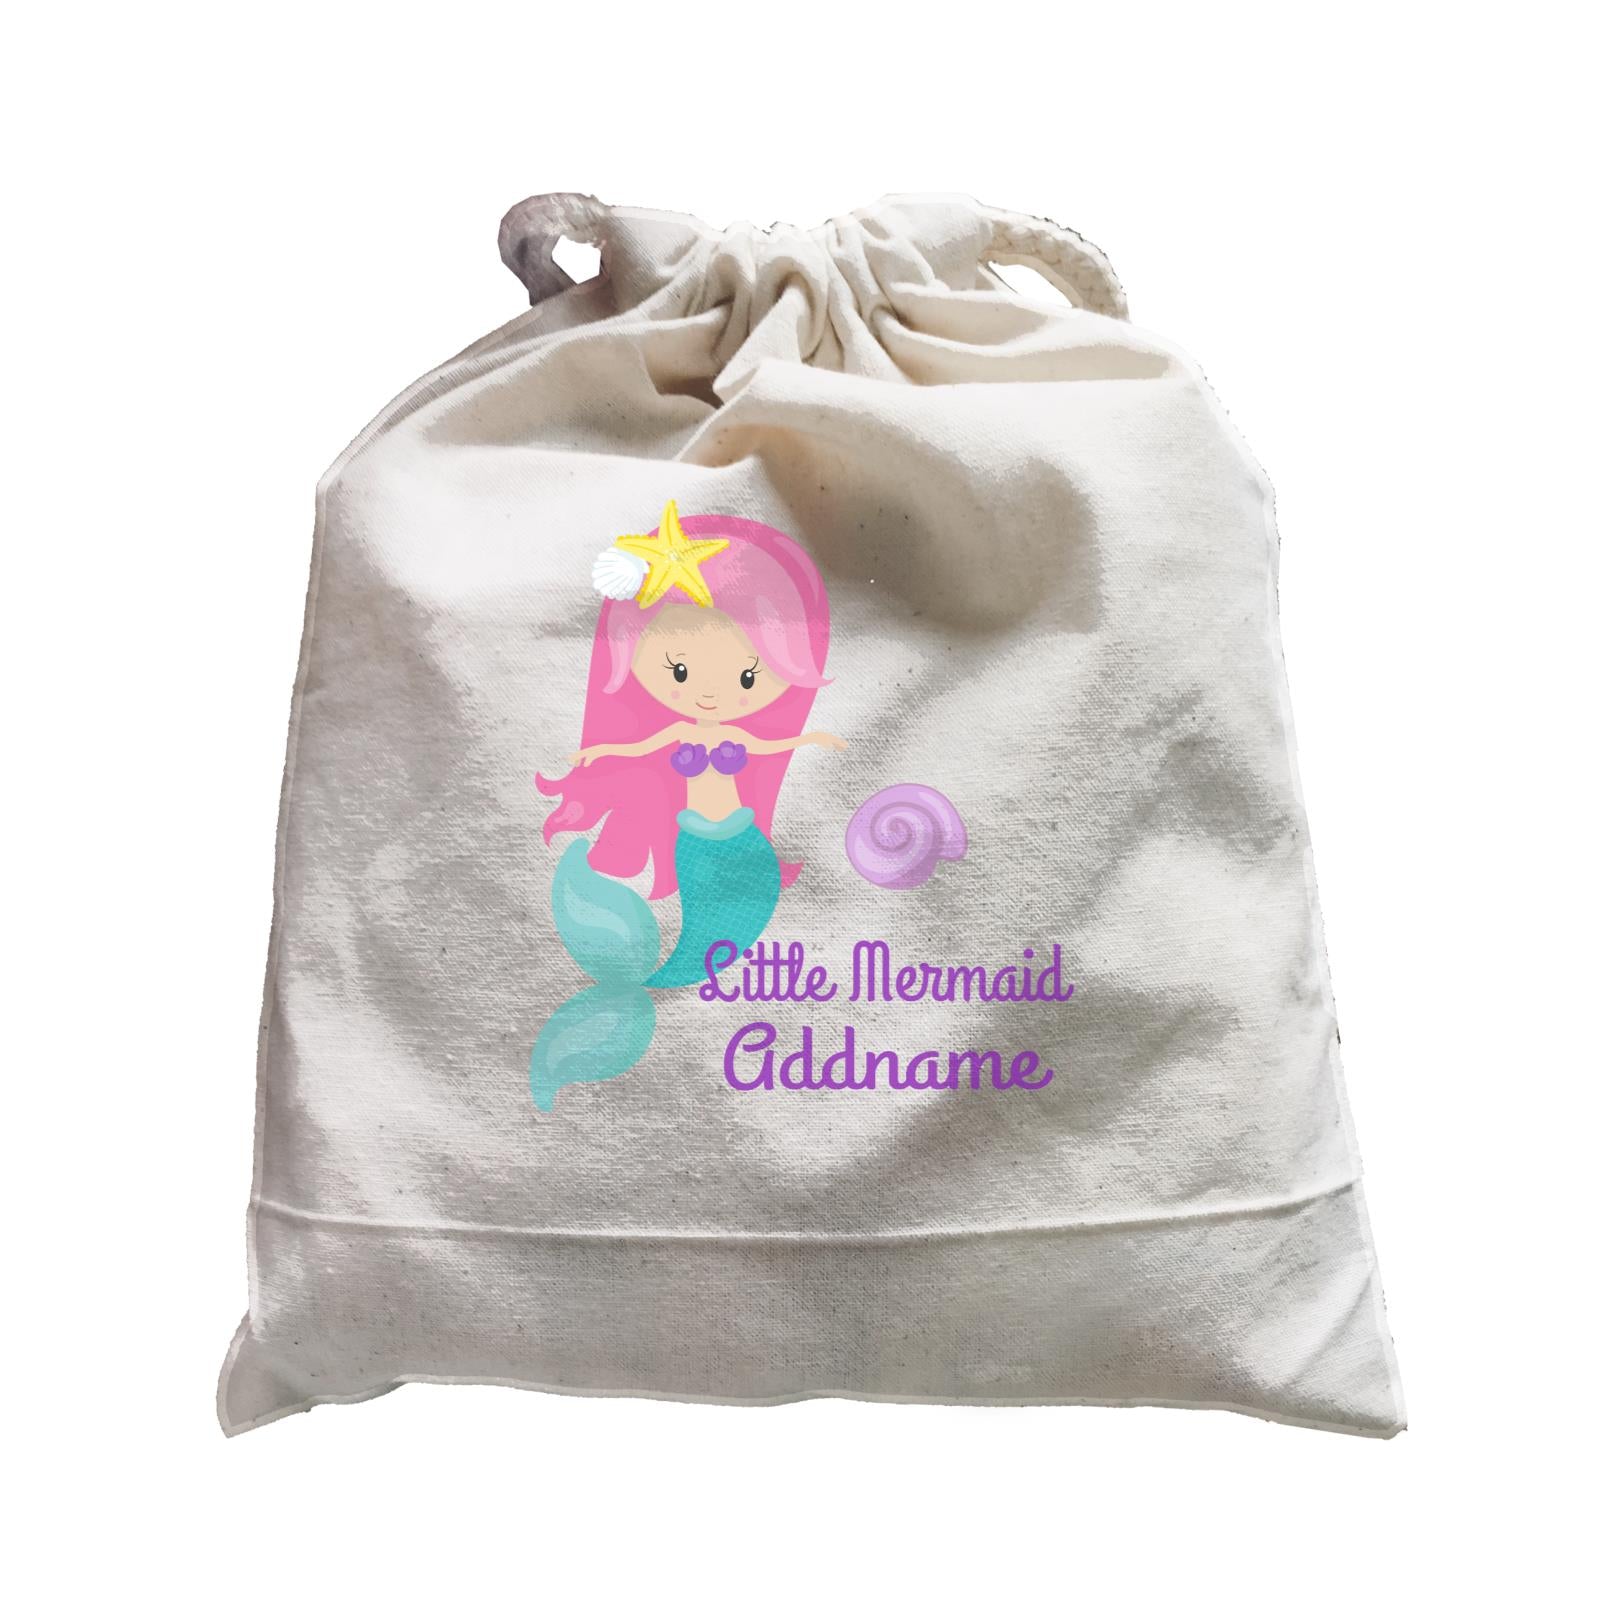 Little Mermaid Upright with Seashell Addname Satchel